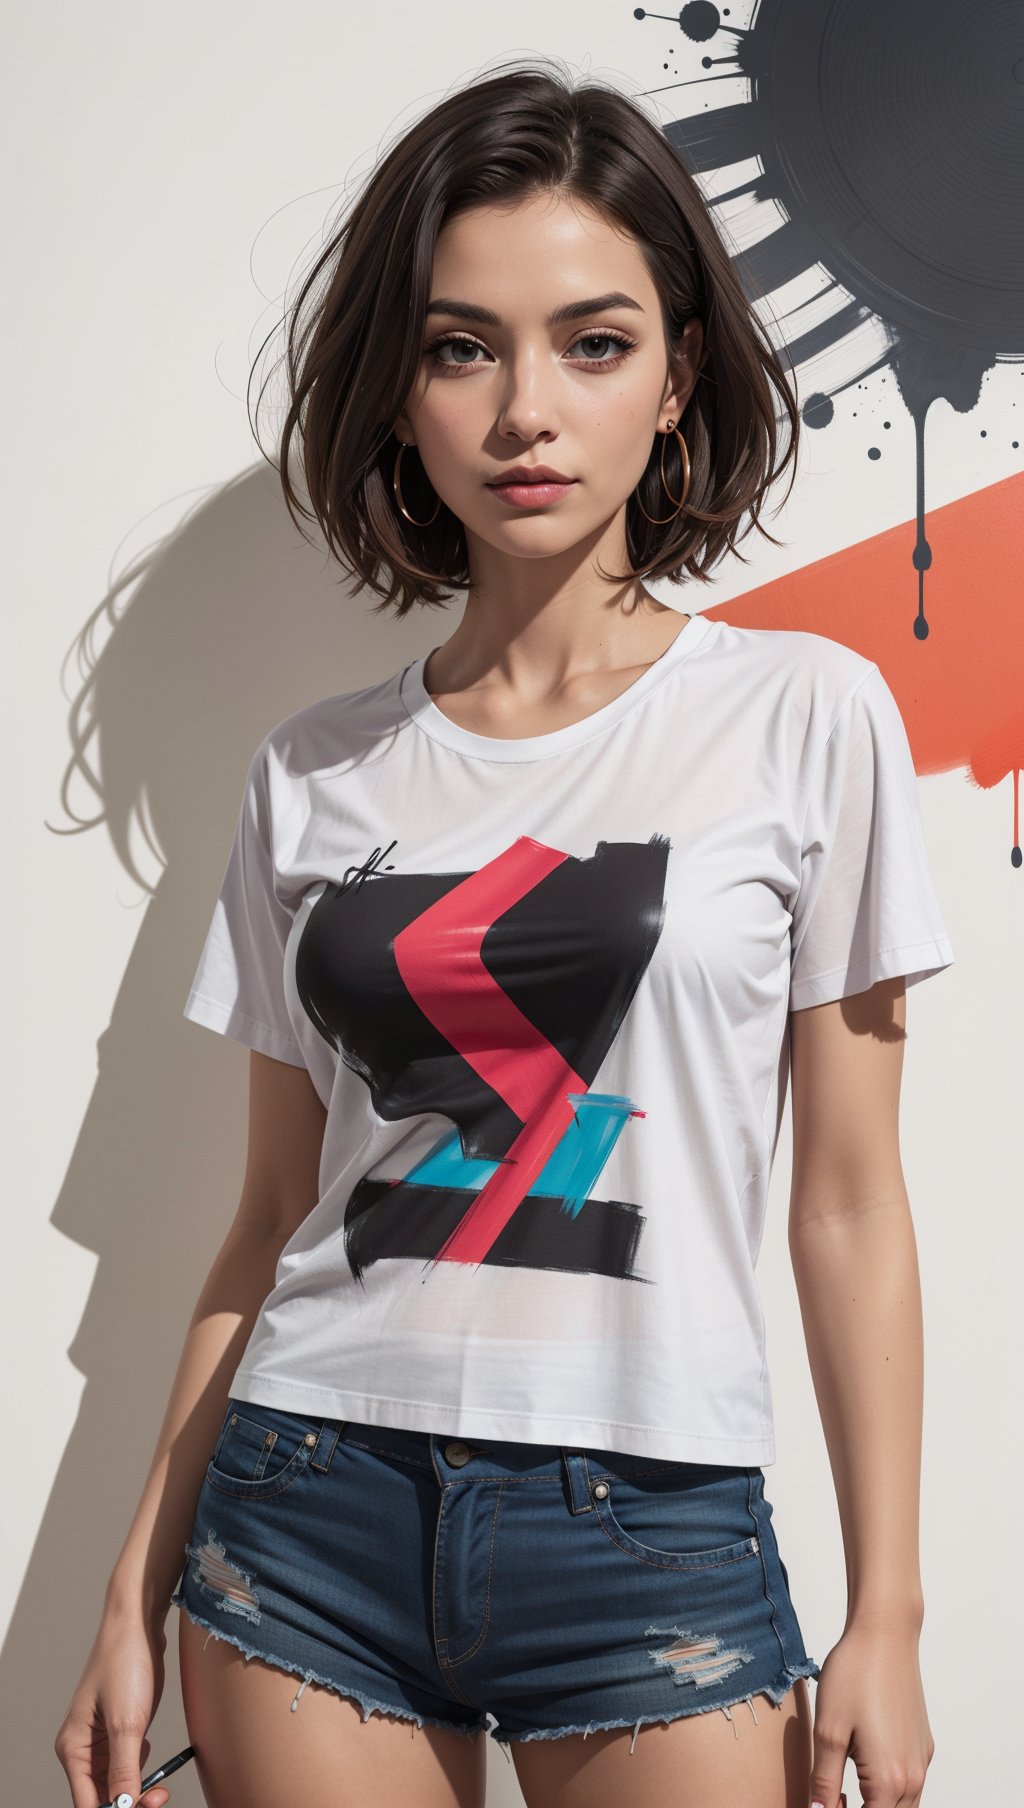 A color poster of a mixture of graffiti and paint on a wall,portrait of a woman,upperbody,wearing white t-shirt,minimalist,with dynamic movement and bold colors,mixture,